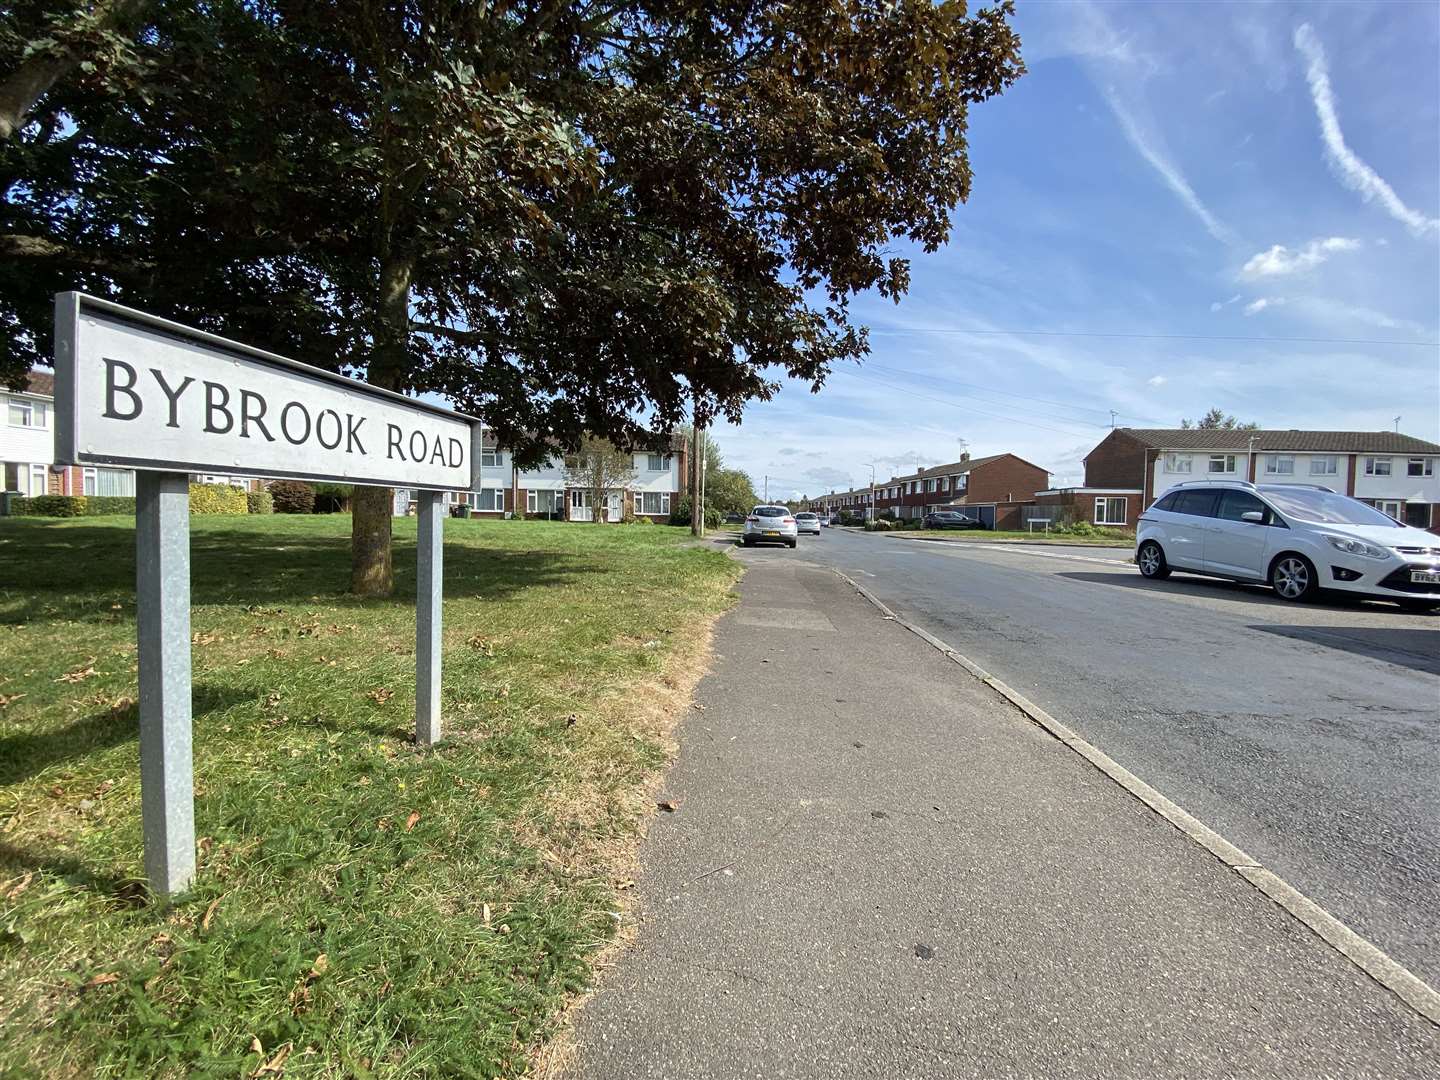 Bybrook Road will be covered by a 20mph limit if the plan goes ahead. Picture: Barry Goodwin